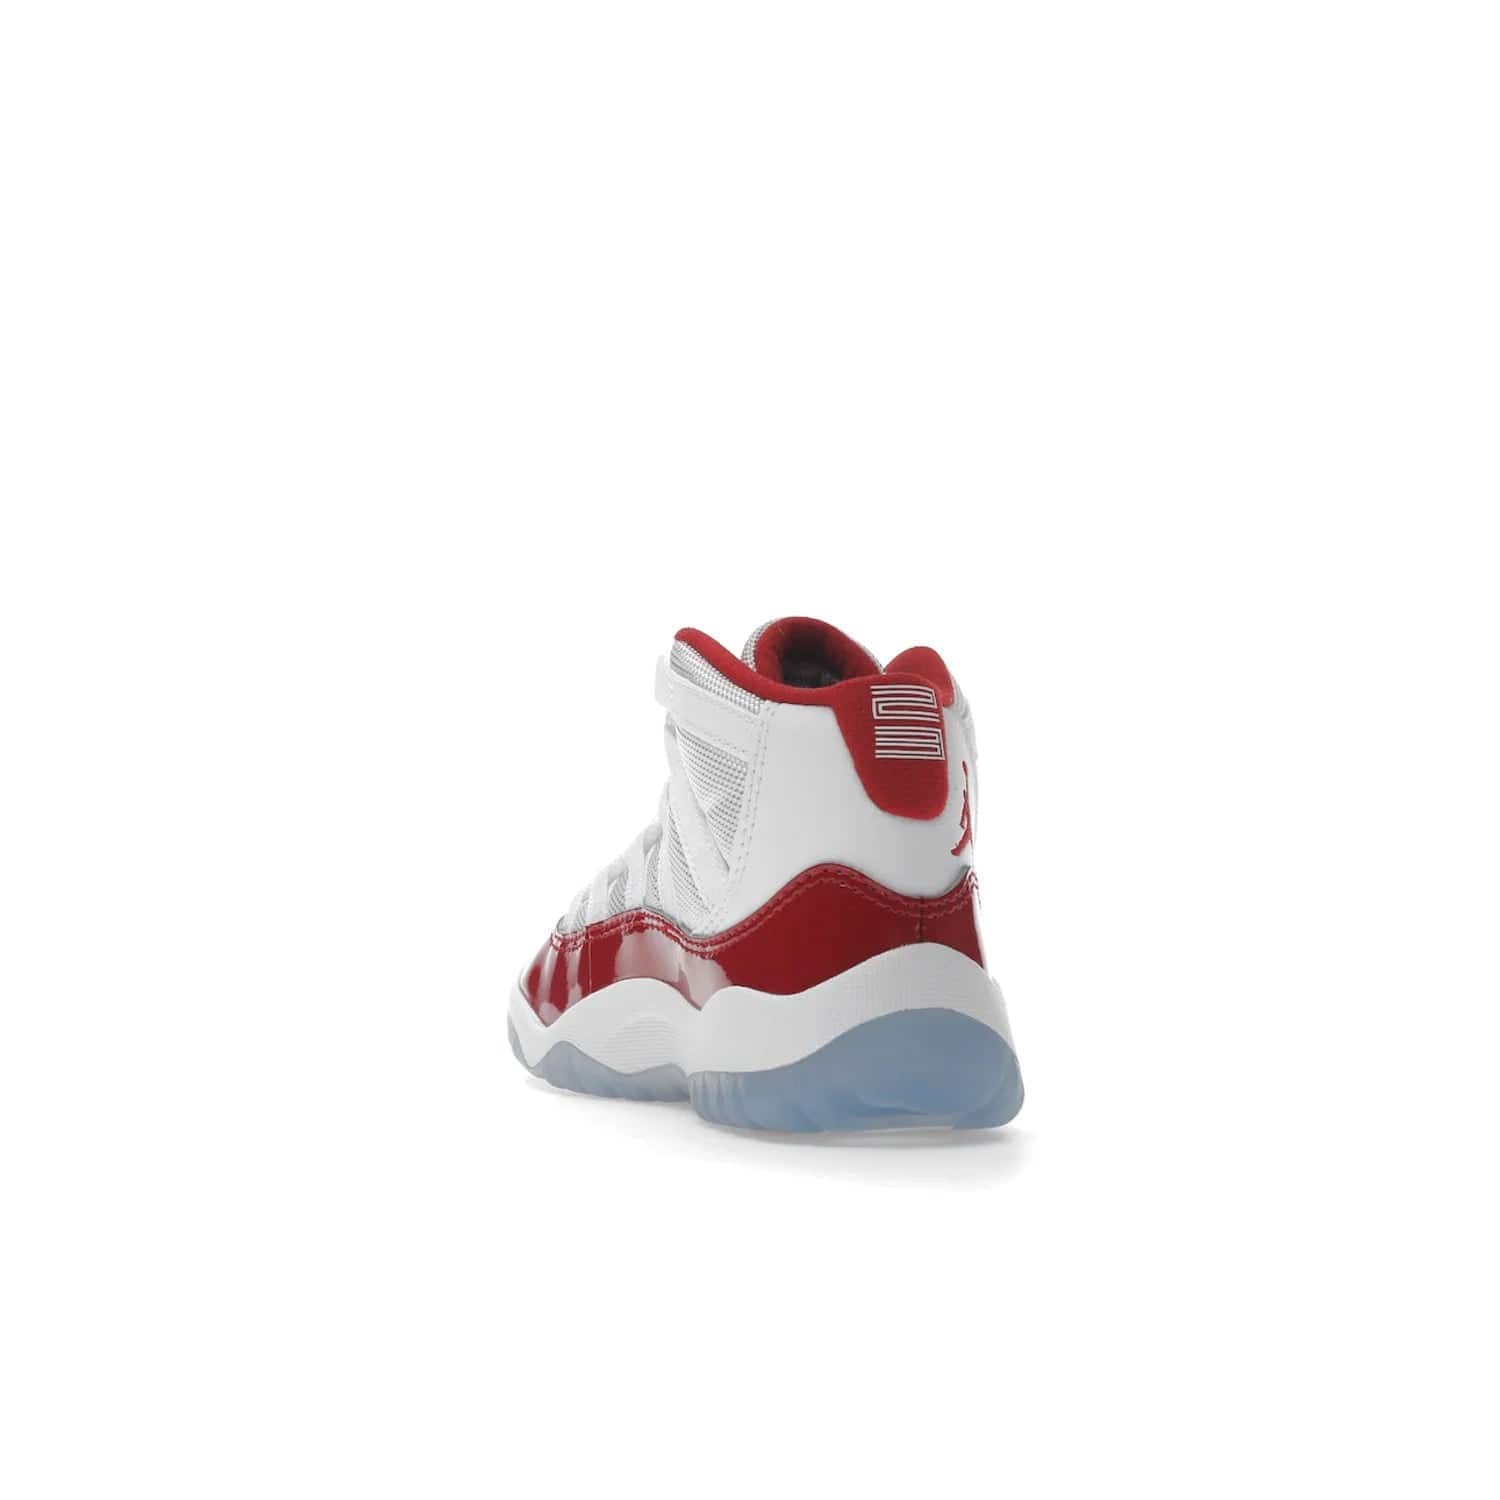 Jordan 11 Retro Cherry (2022) (PS) - Image 26 - Only at www.BallersClubKickz.com - An iconic silhouette with a timeless look, the Air Jordan 11 Retro Cherry 2022 PS features a crisp White, Varsity Red and Black colorway. The upper is made of ballistic mesh, a red patent leather mudguard, '23' branding and white Phylon midsole. Get optimal cushioning and comfort on December 10th, 2022. Don't miss out.